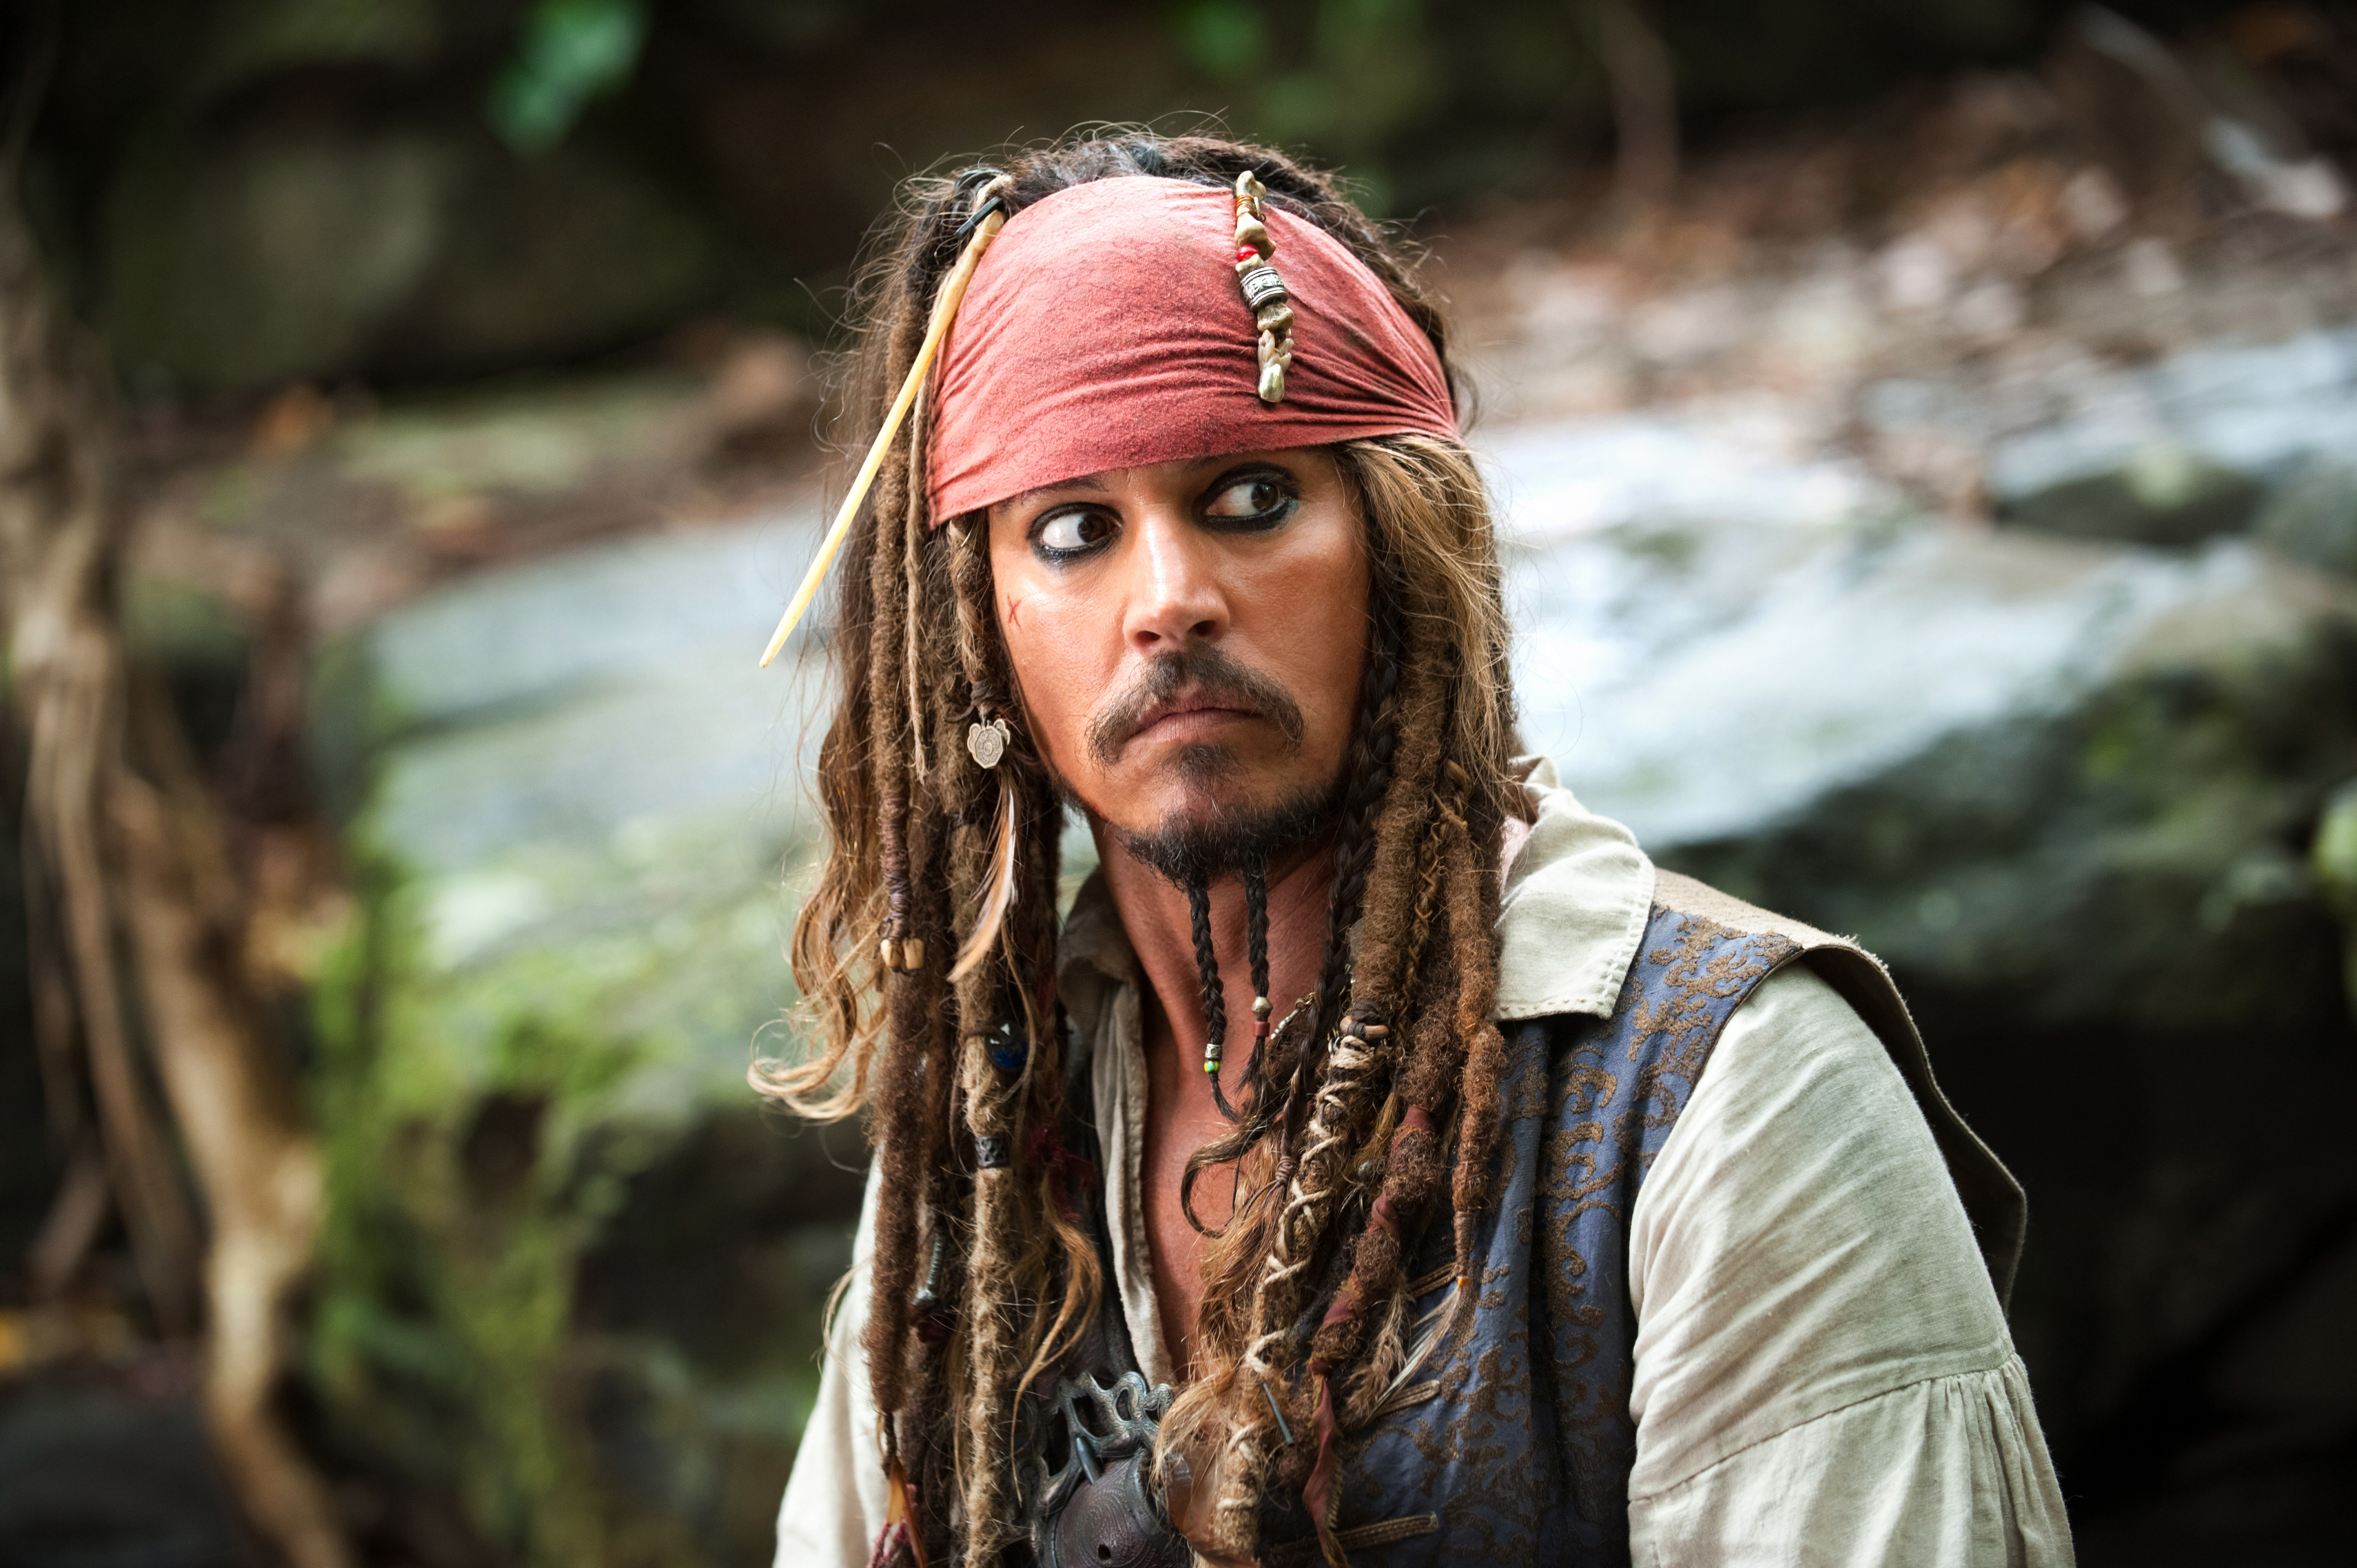 jack sparrow, pirates of the caribbean, pirates of the caribbean: on stranger tides, johnny depp, movie